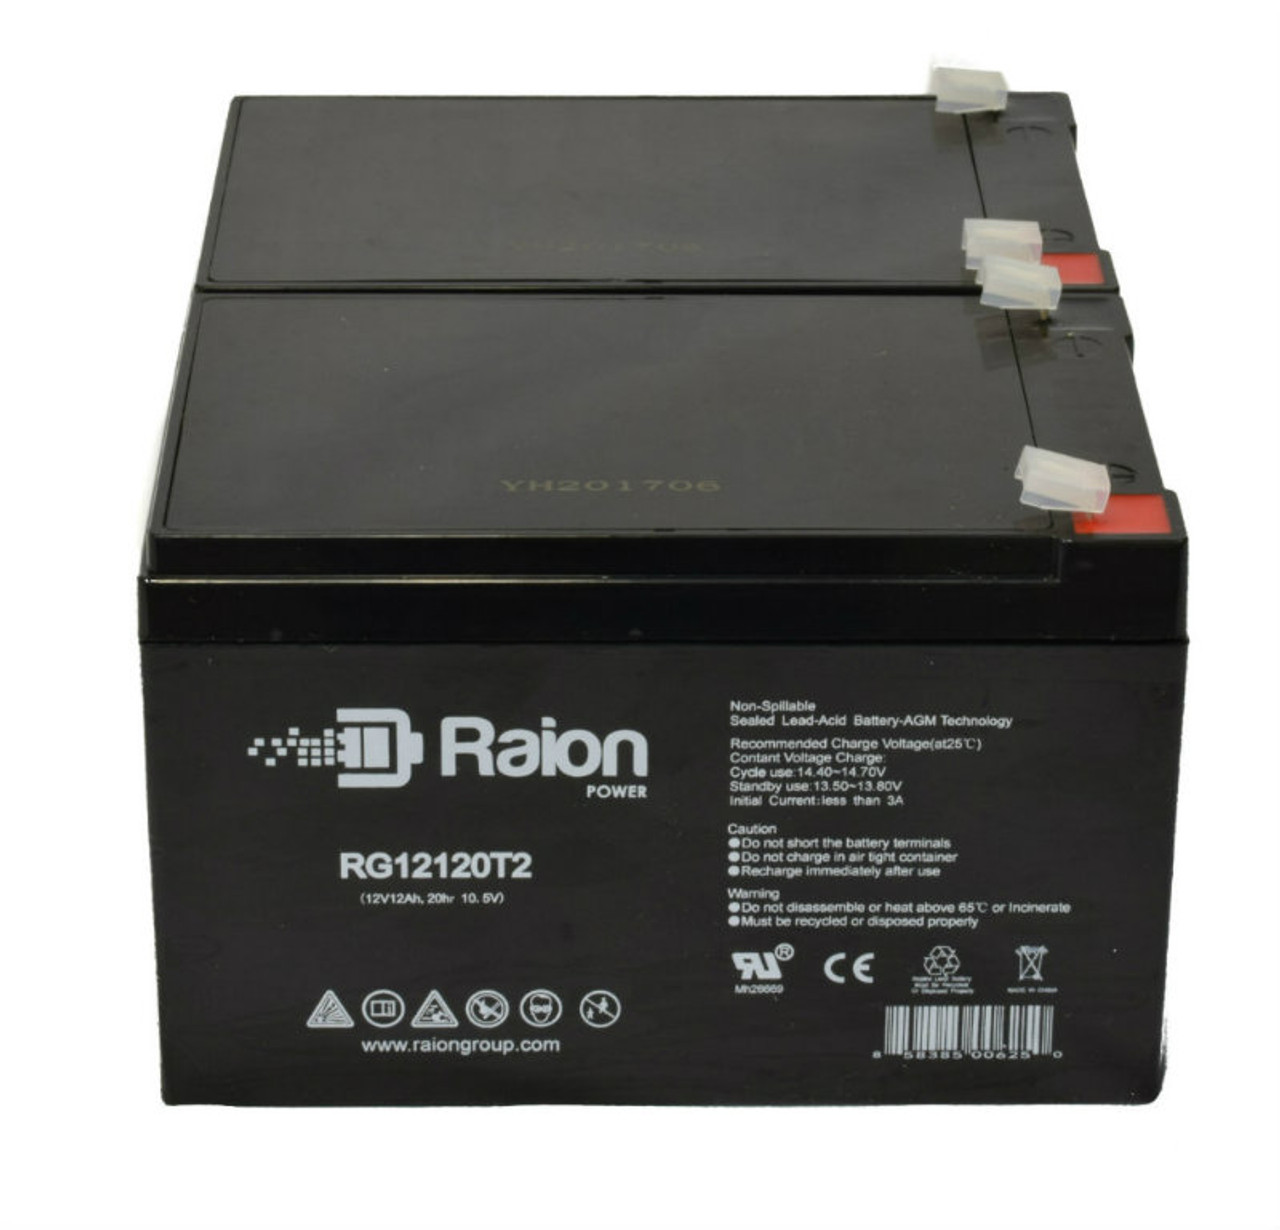 Raion Power RG12120T2 Replacement Battery Set for Drive Medical Design Spitfire EX 1420 Scooter Mobility Scooter - 2 Pack